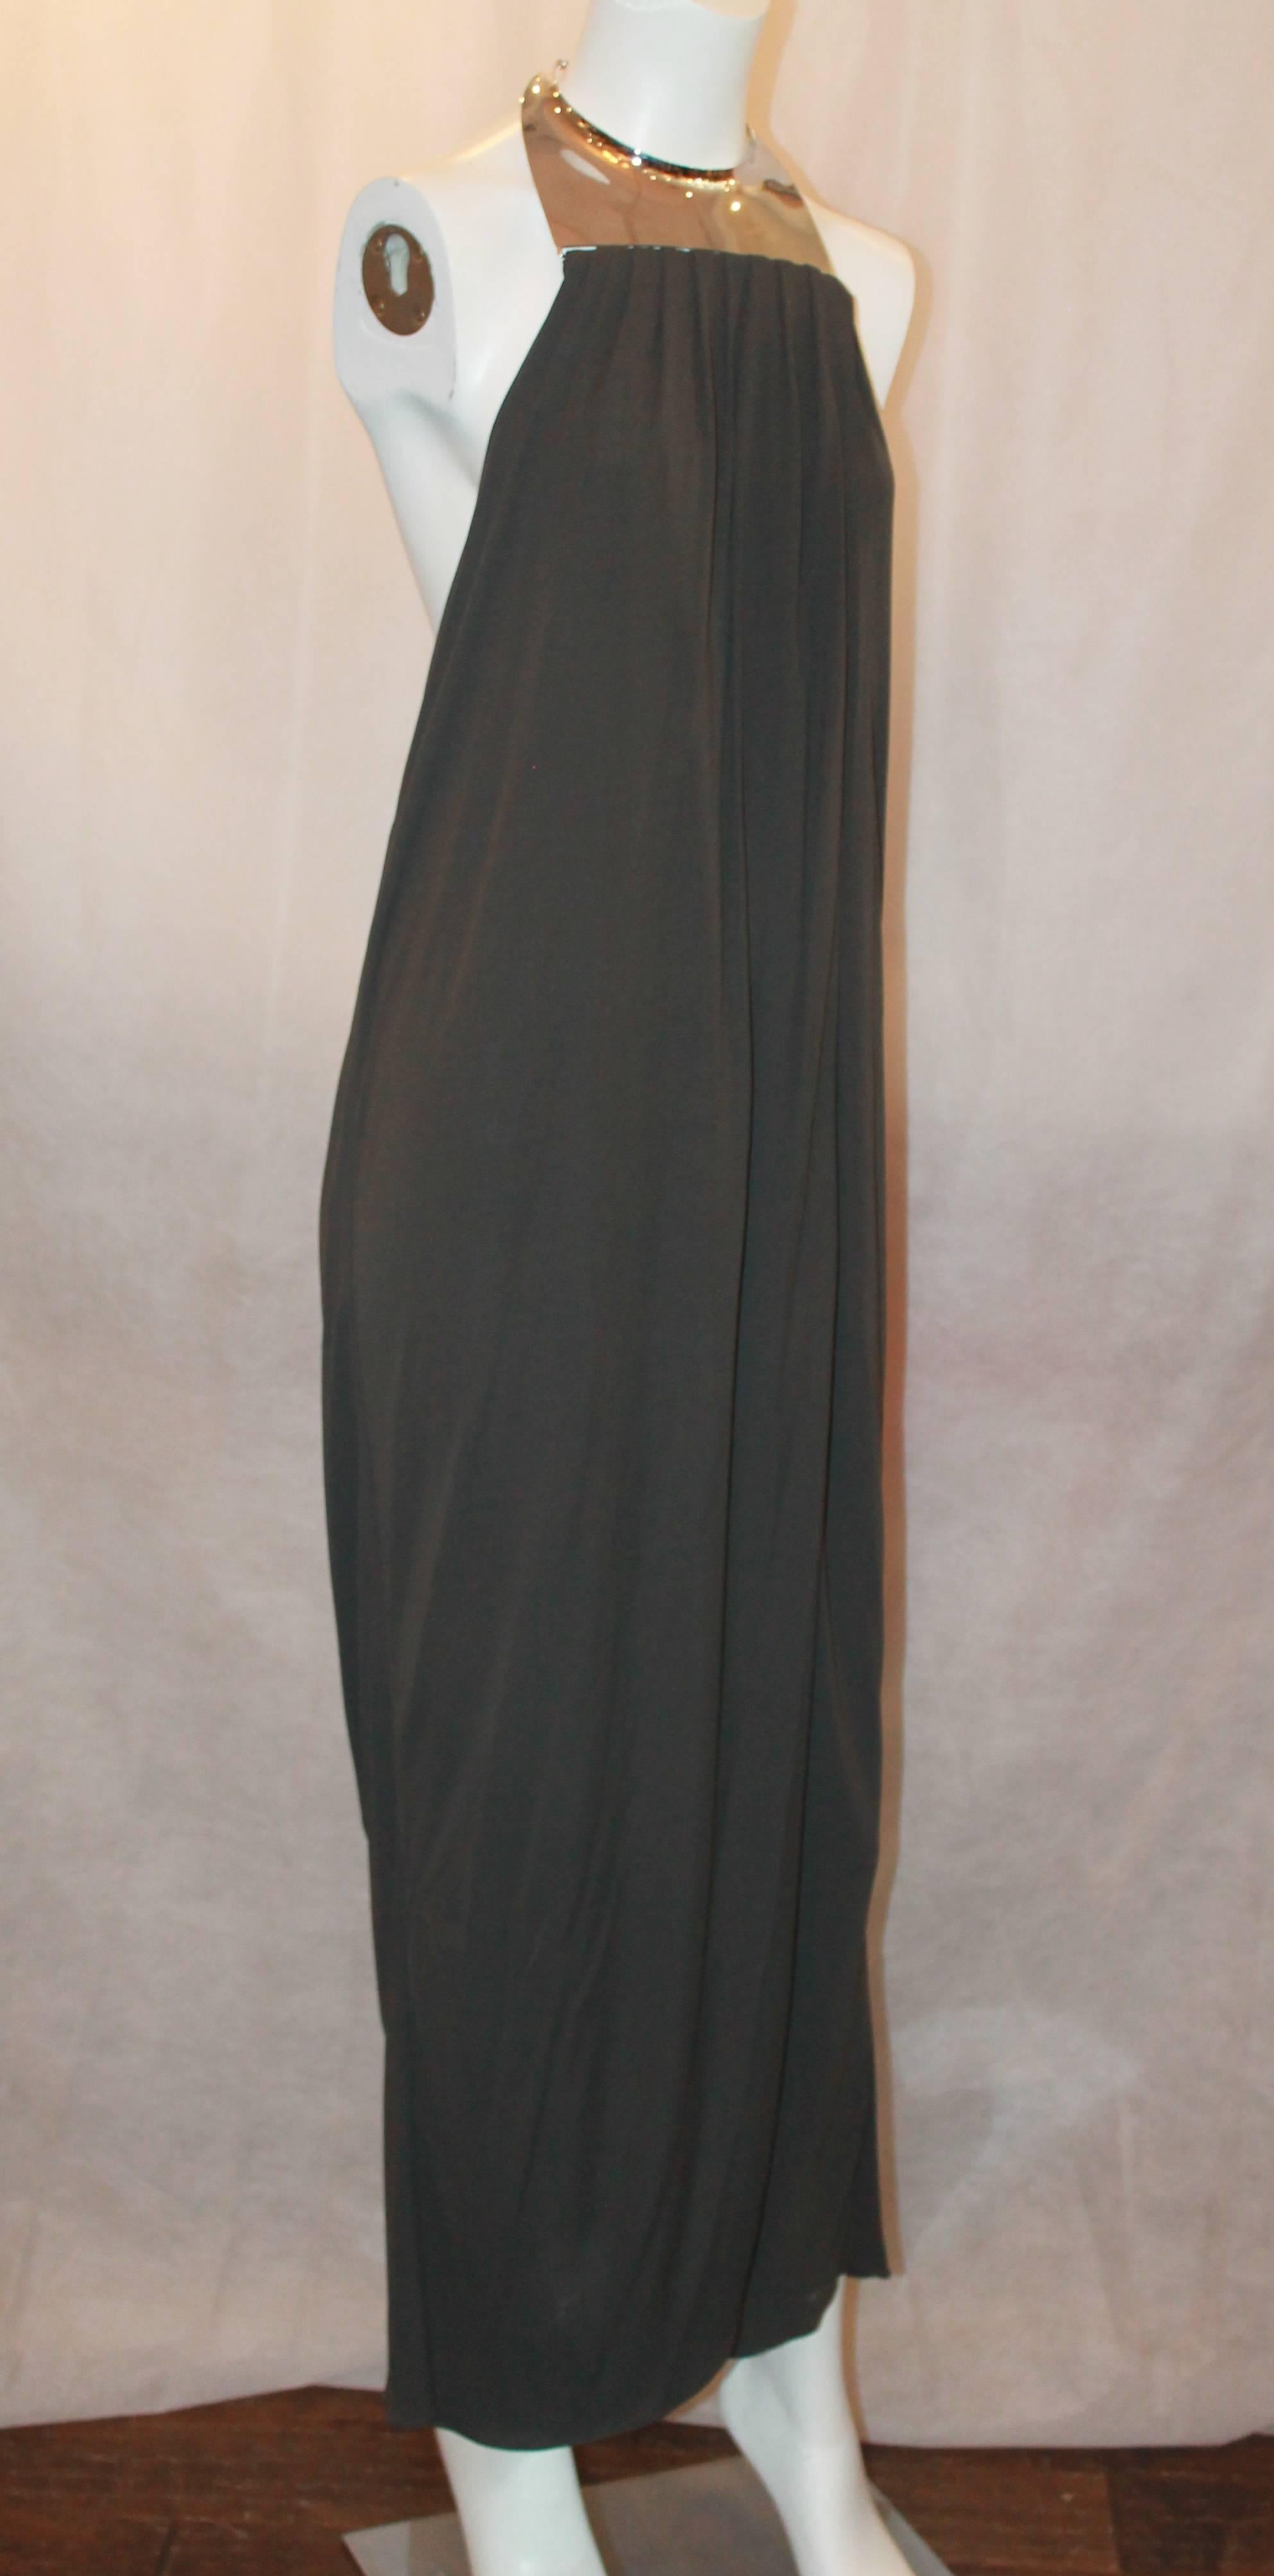 Michael Kors Grey jersey gown w/ silver hardware neck/collar-Sz 8-NWT 
Retail $3,900 This beautiful jersey gown crosses in the front and has a very low and sexy back. It is super chic and a true statement piece to wear to any black tie event.